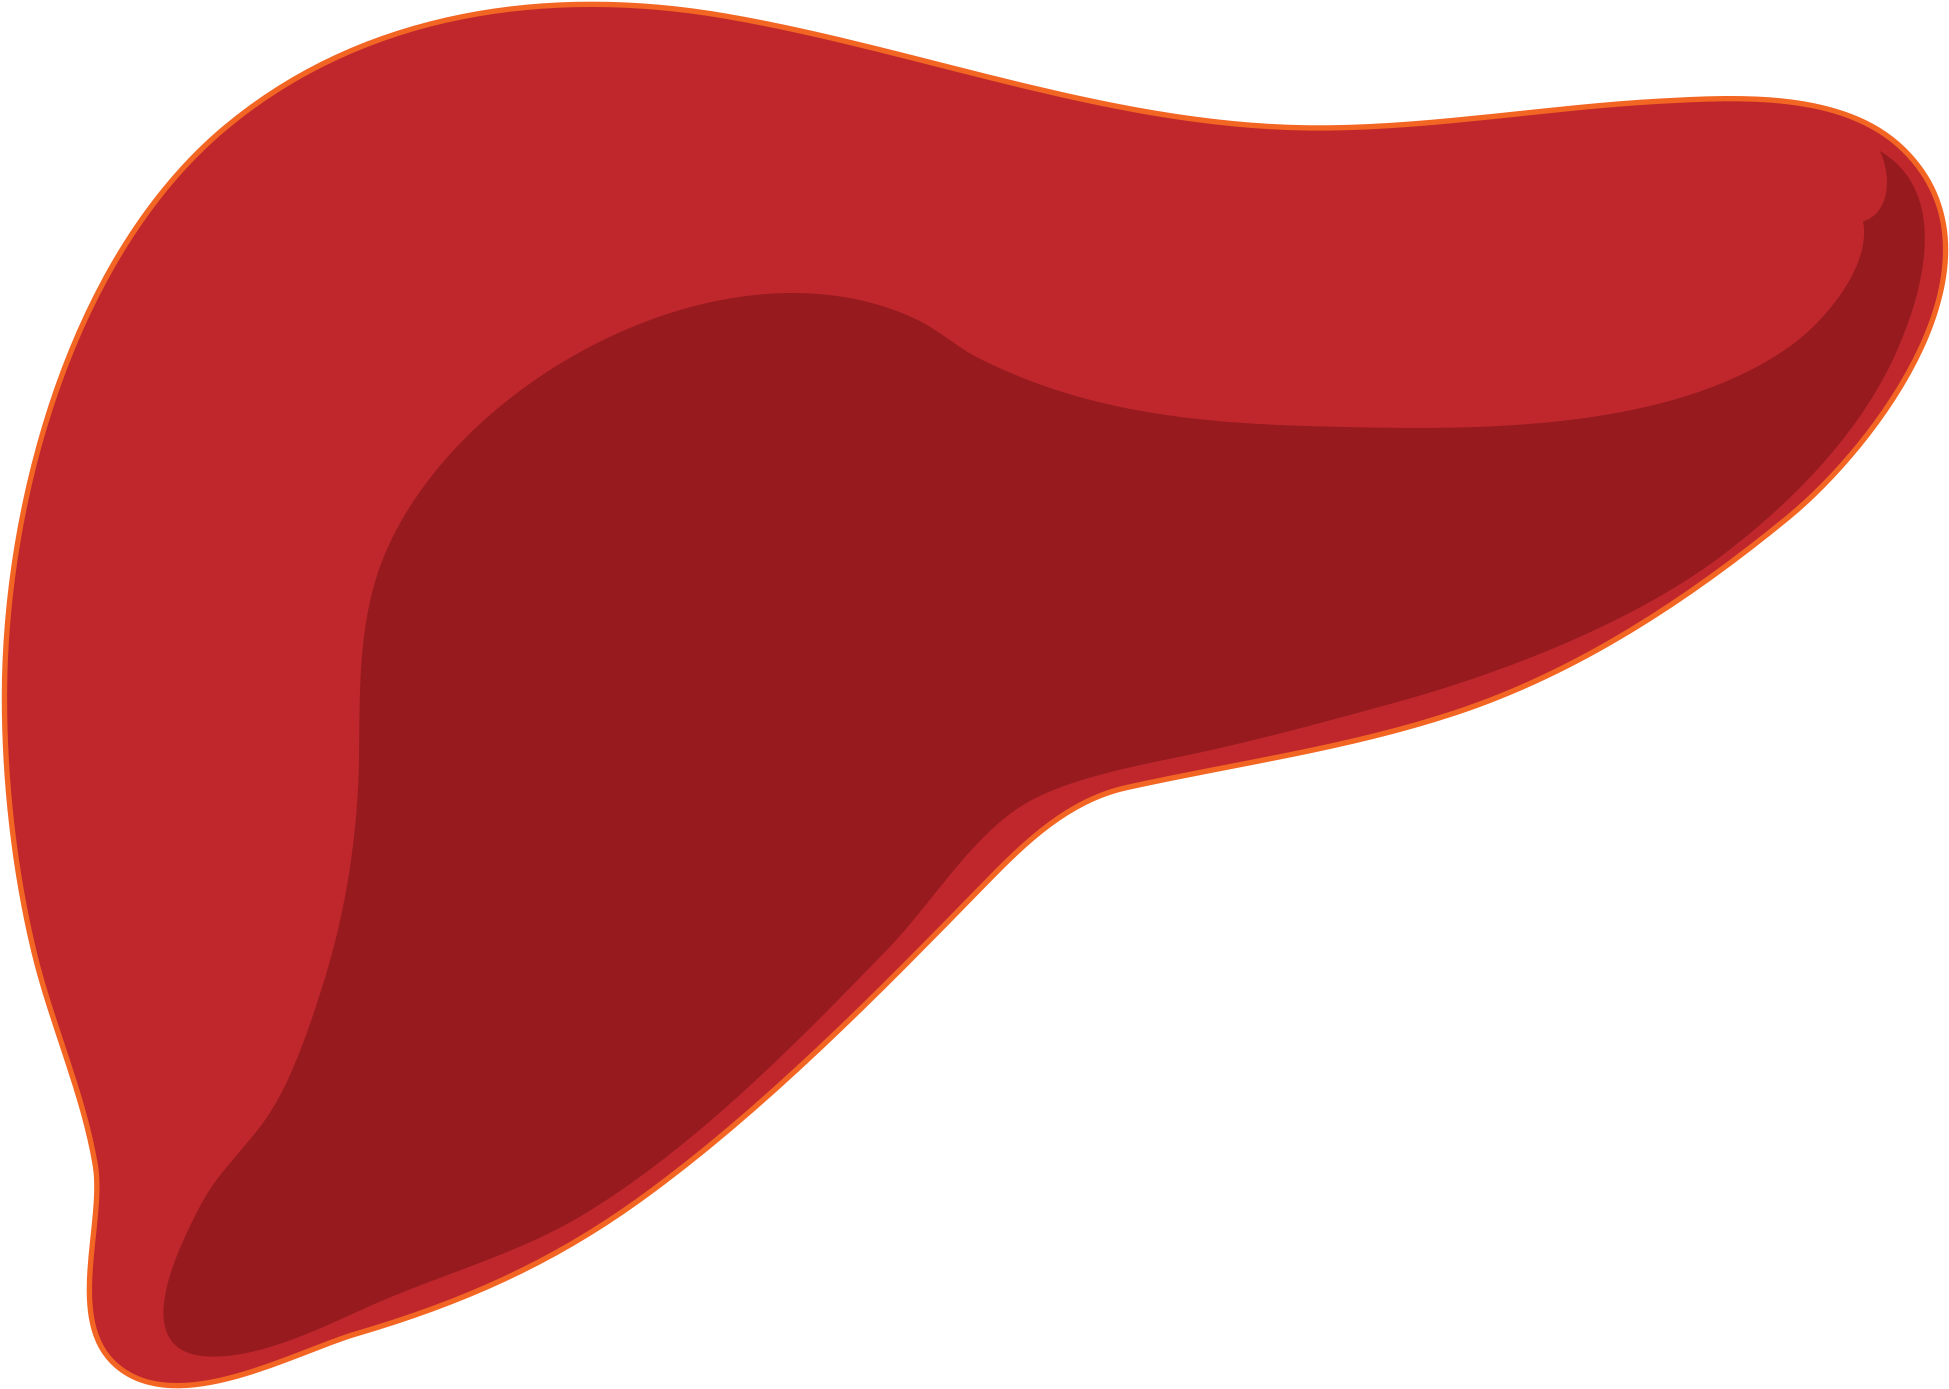 A Red Liver On A Black Background